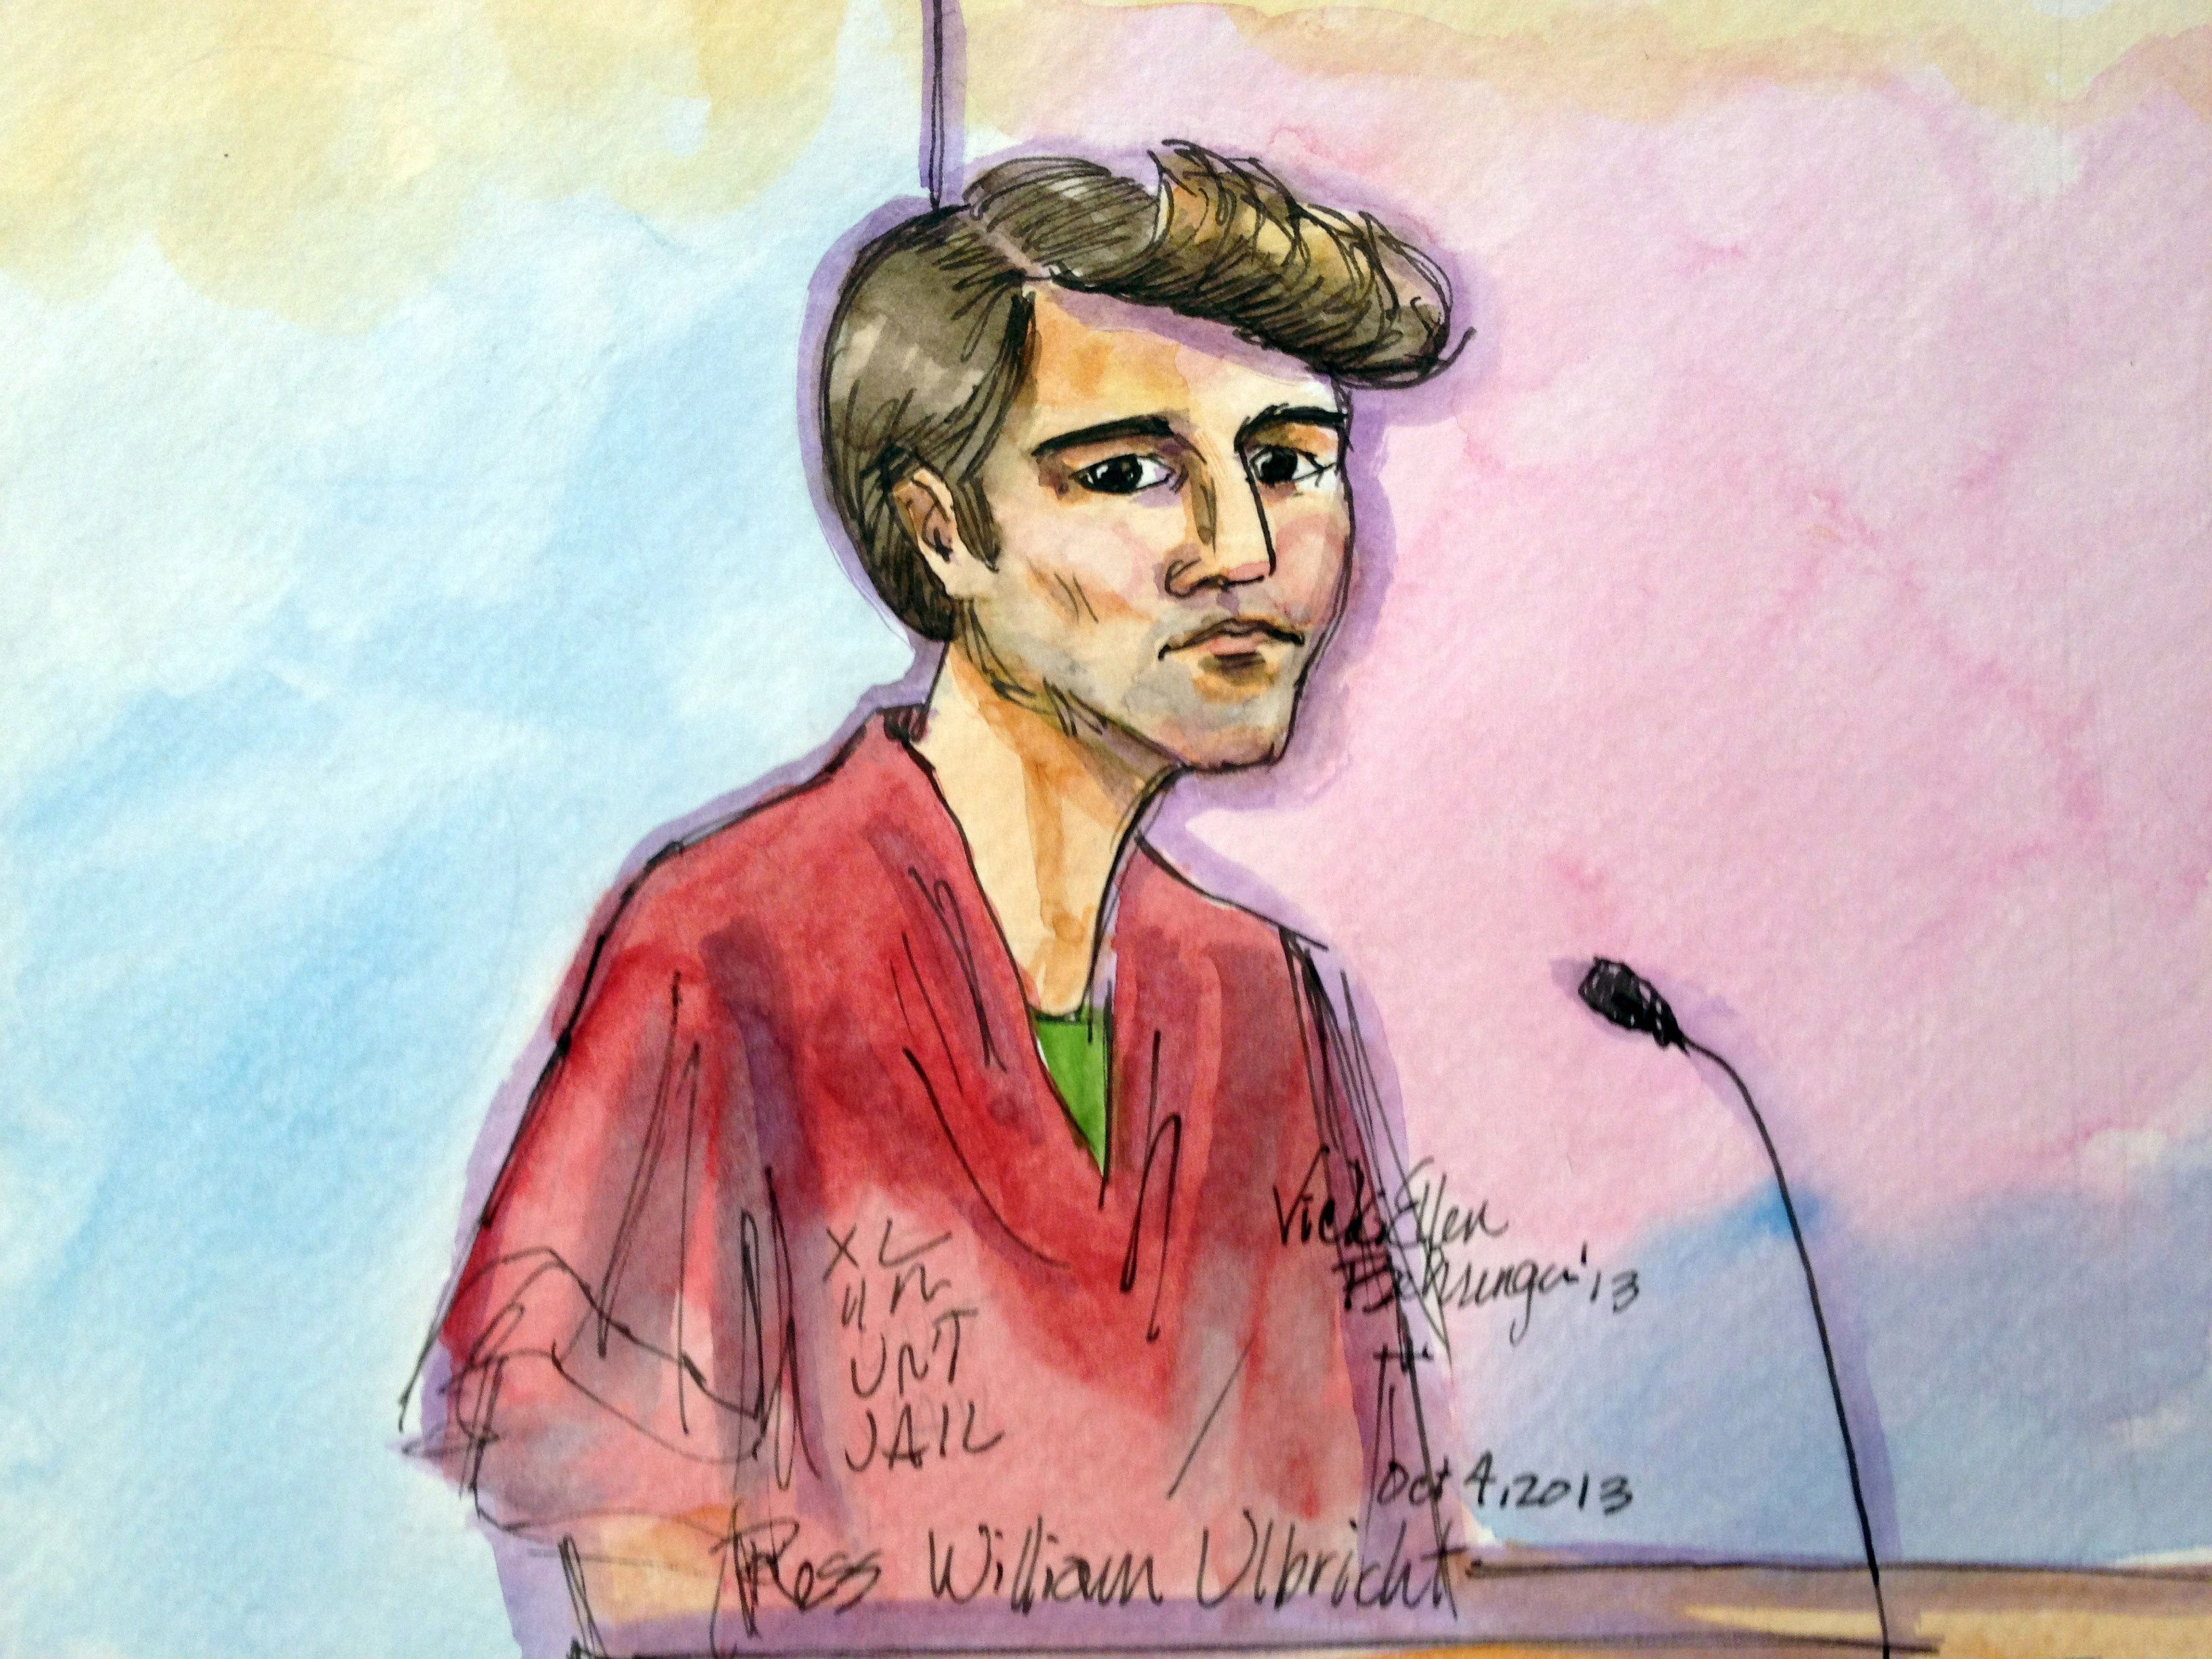 An artist rendering of Ross William Ulbricht during a federal court appearance in San Francisco on Oct. 4, 2013. (Vicki Behringer—AP)